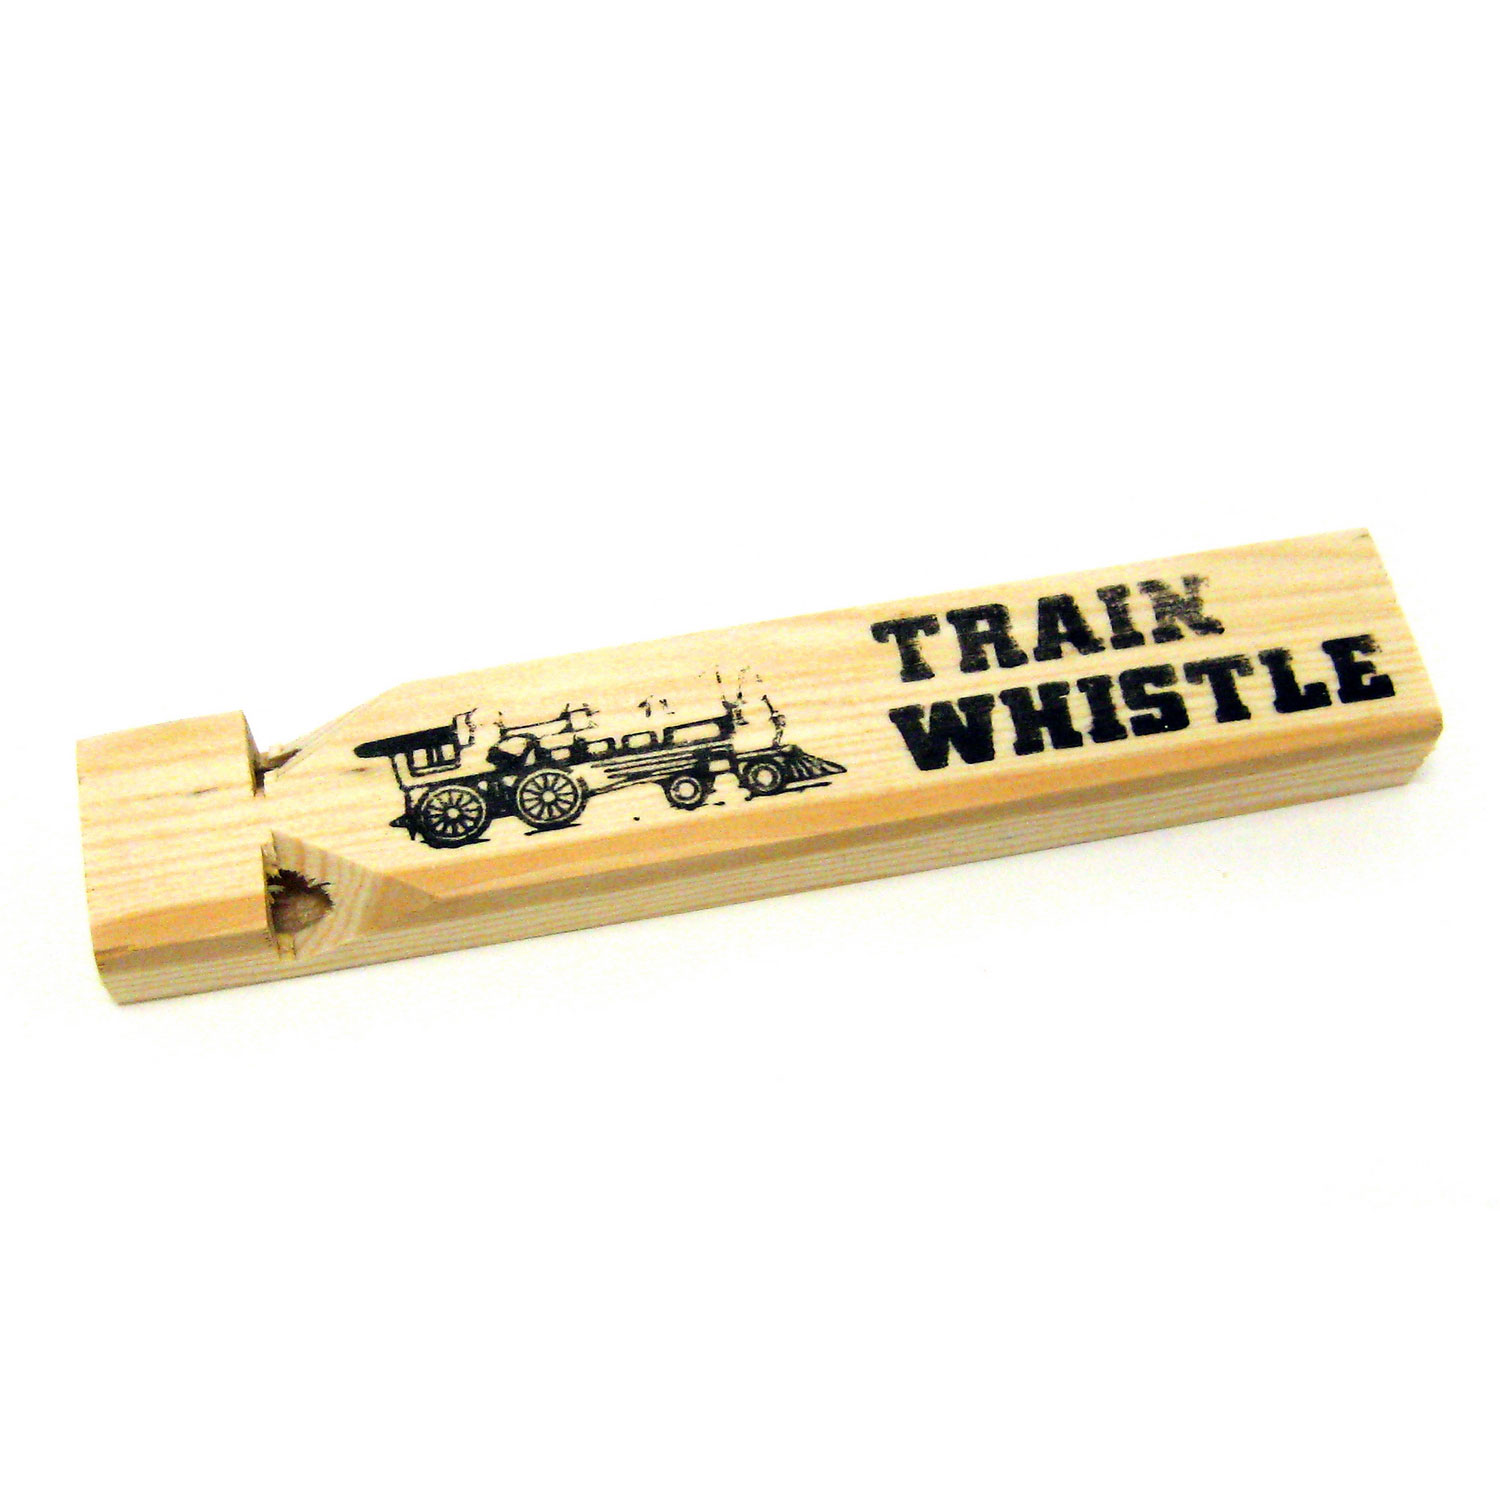 75 NEW WOODEN TRAIN WHISTLES WOOD WHISTLE ABOUT 6" FAST SHIPPING PARTY CARNIVAL 